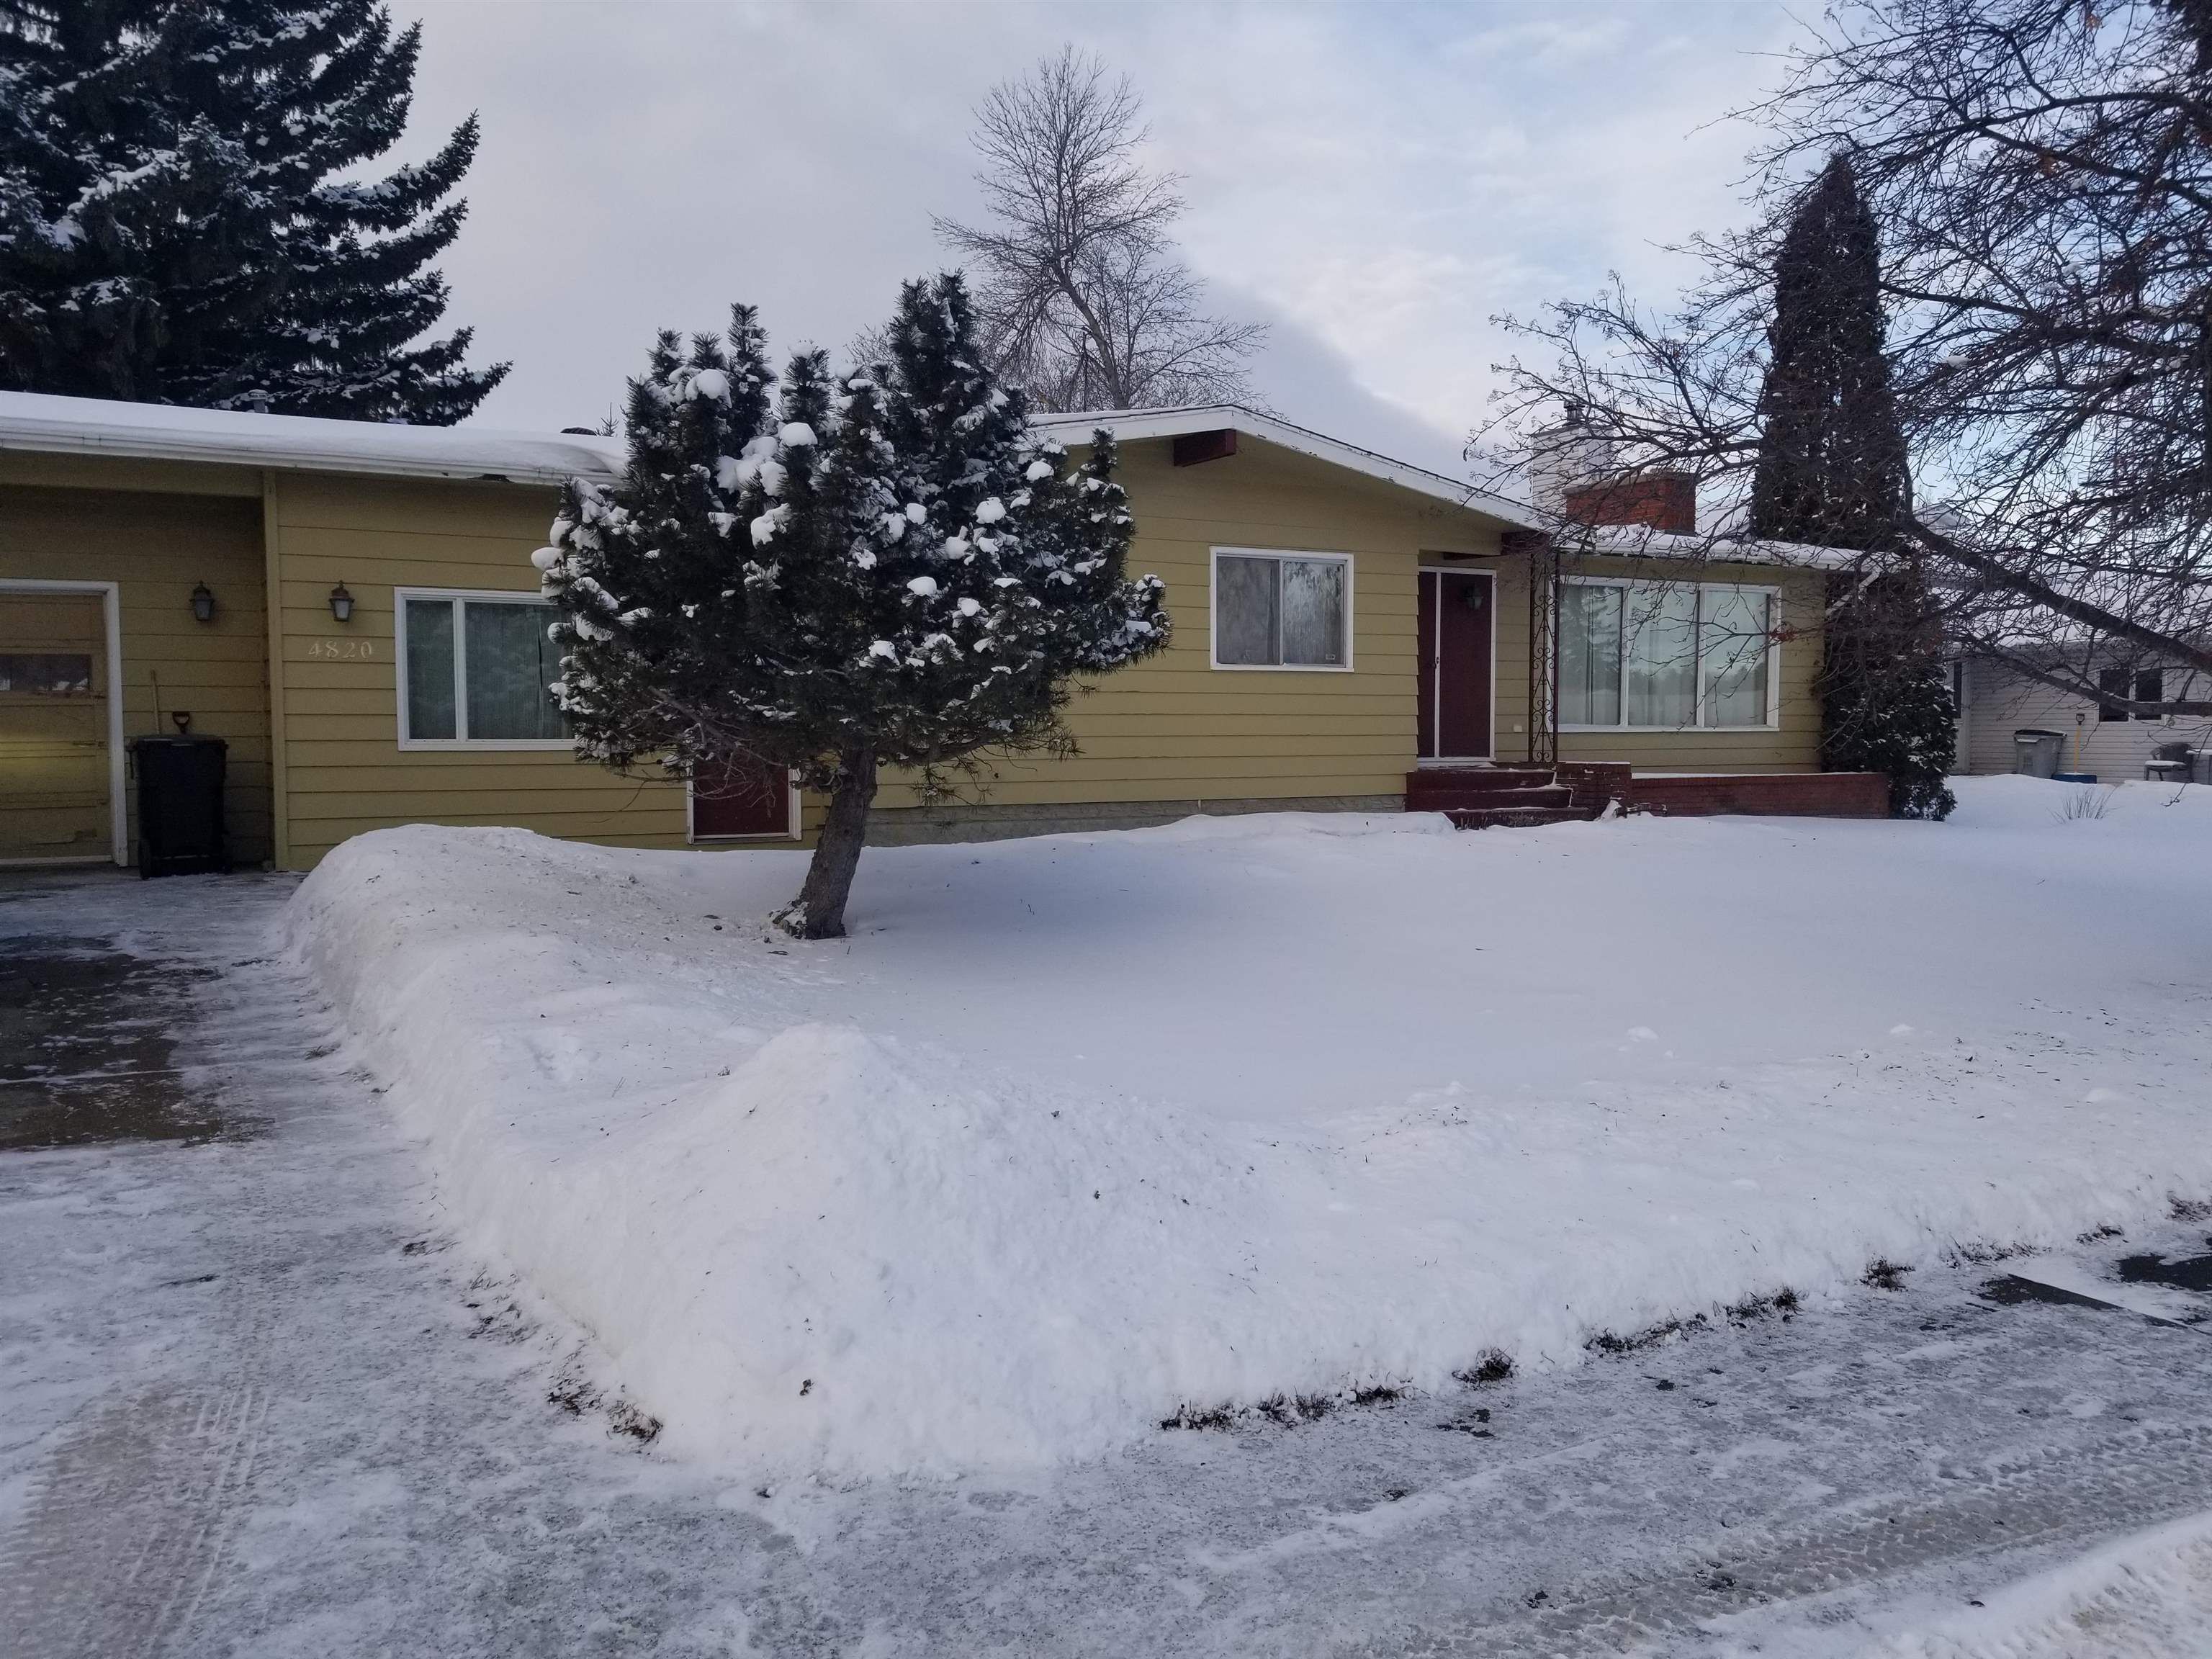 Main Photo: 4820 53 Street: Redwater House for sale : MLS®# E4272417